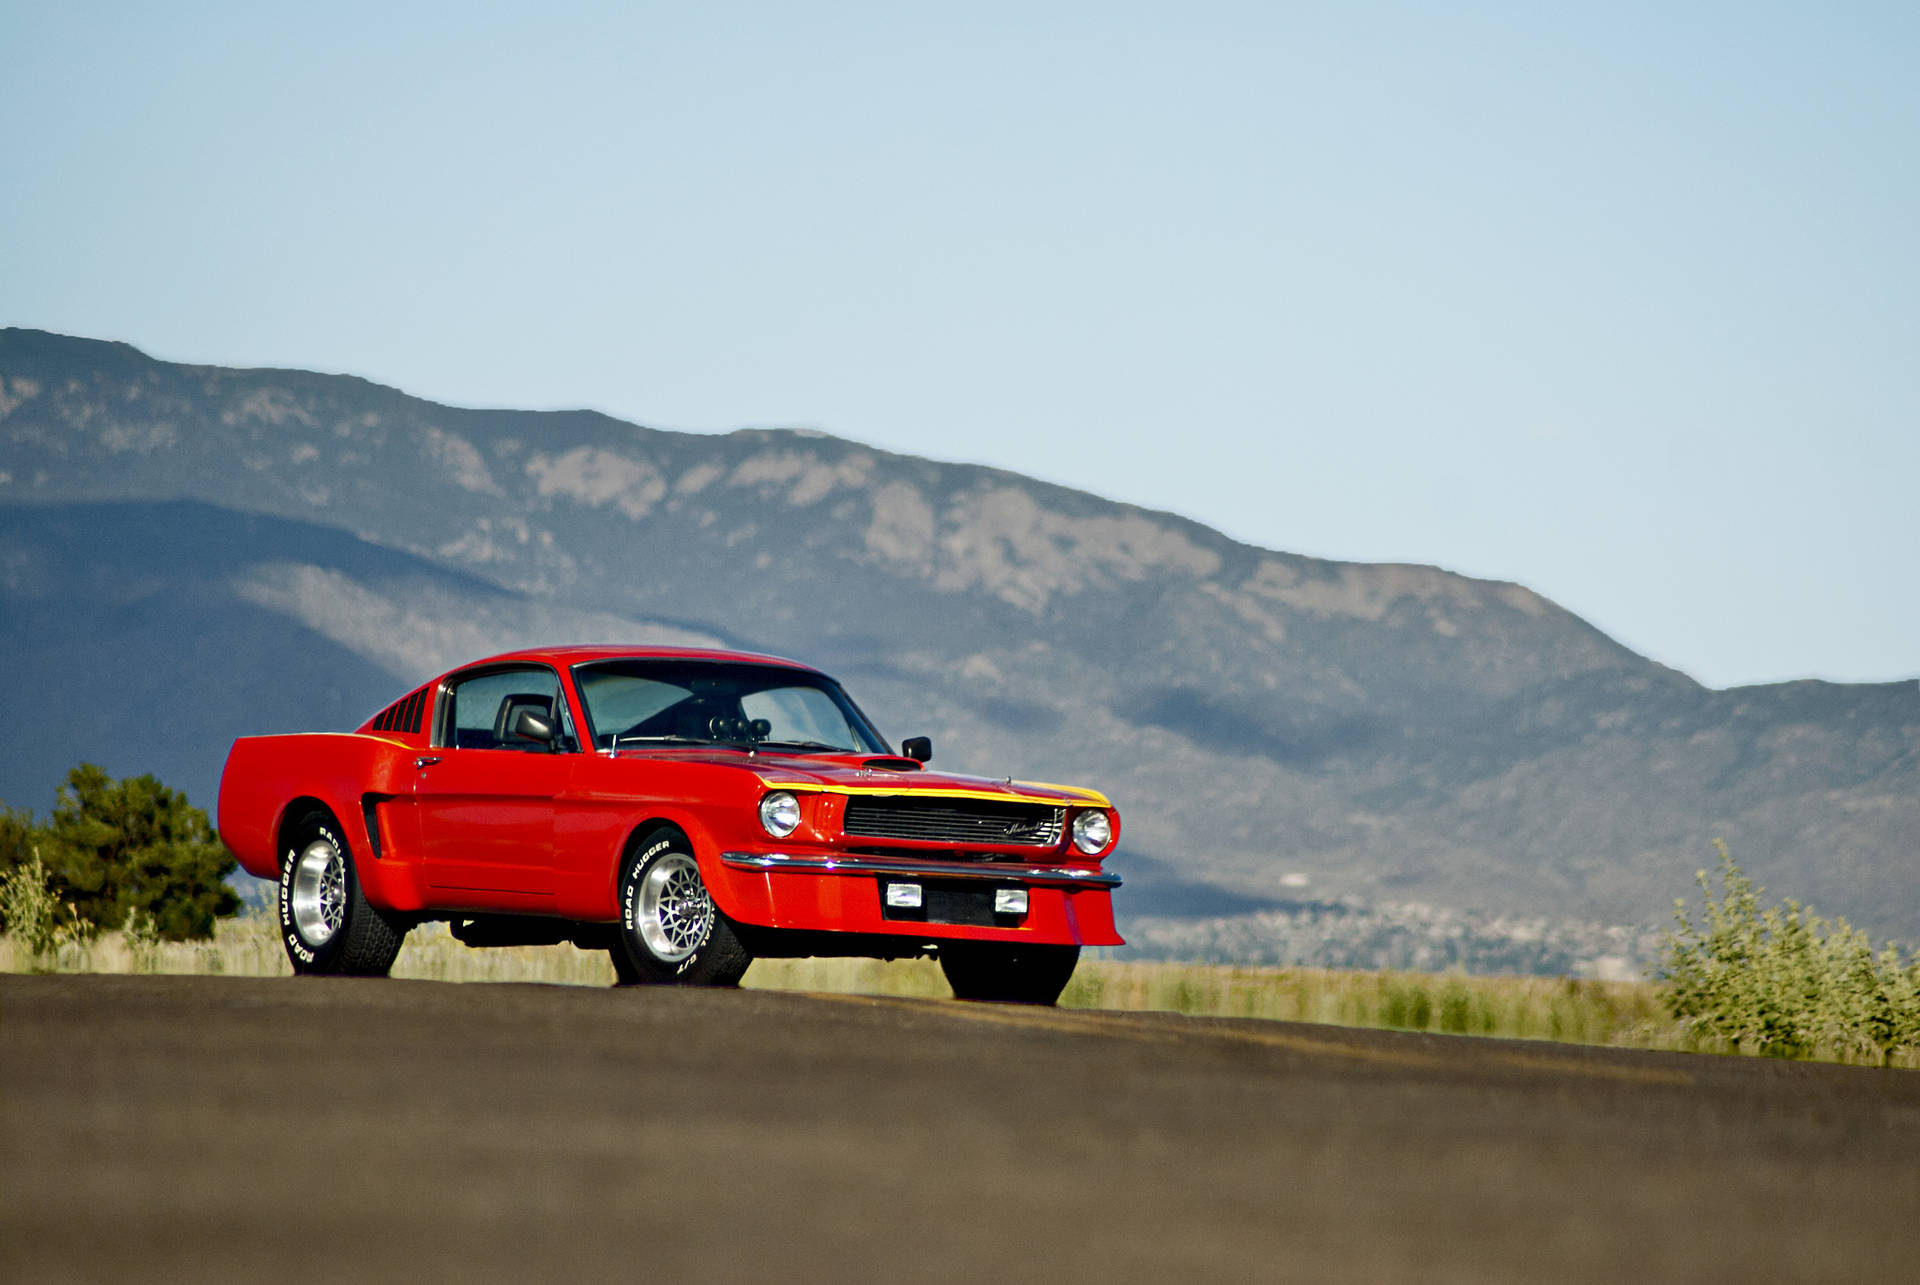 Vintage Red Ford Mustang 1965 Background